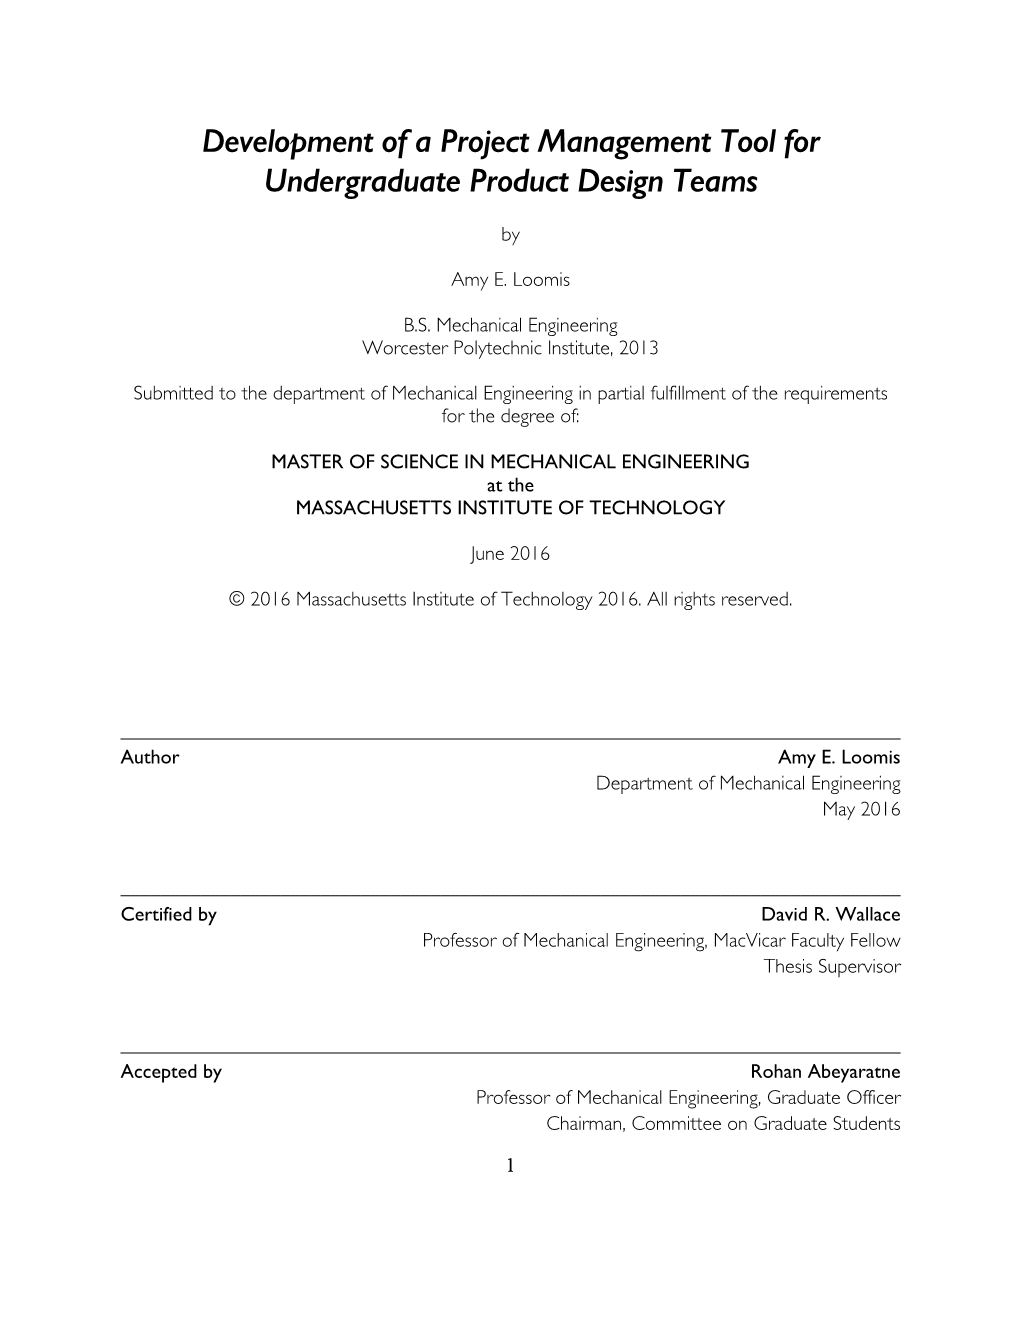 Development of a Project Management Tool for Undergraduate Product Design Teams